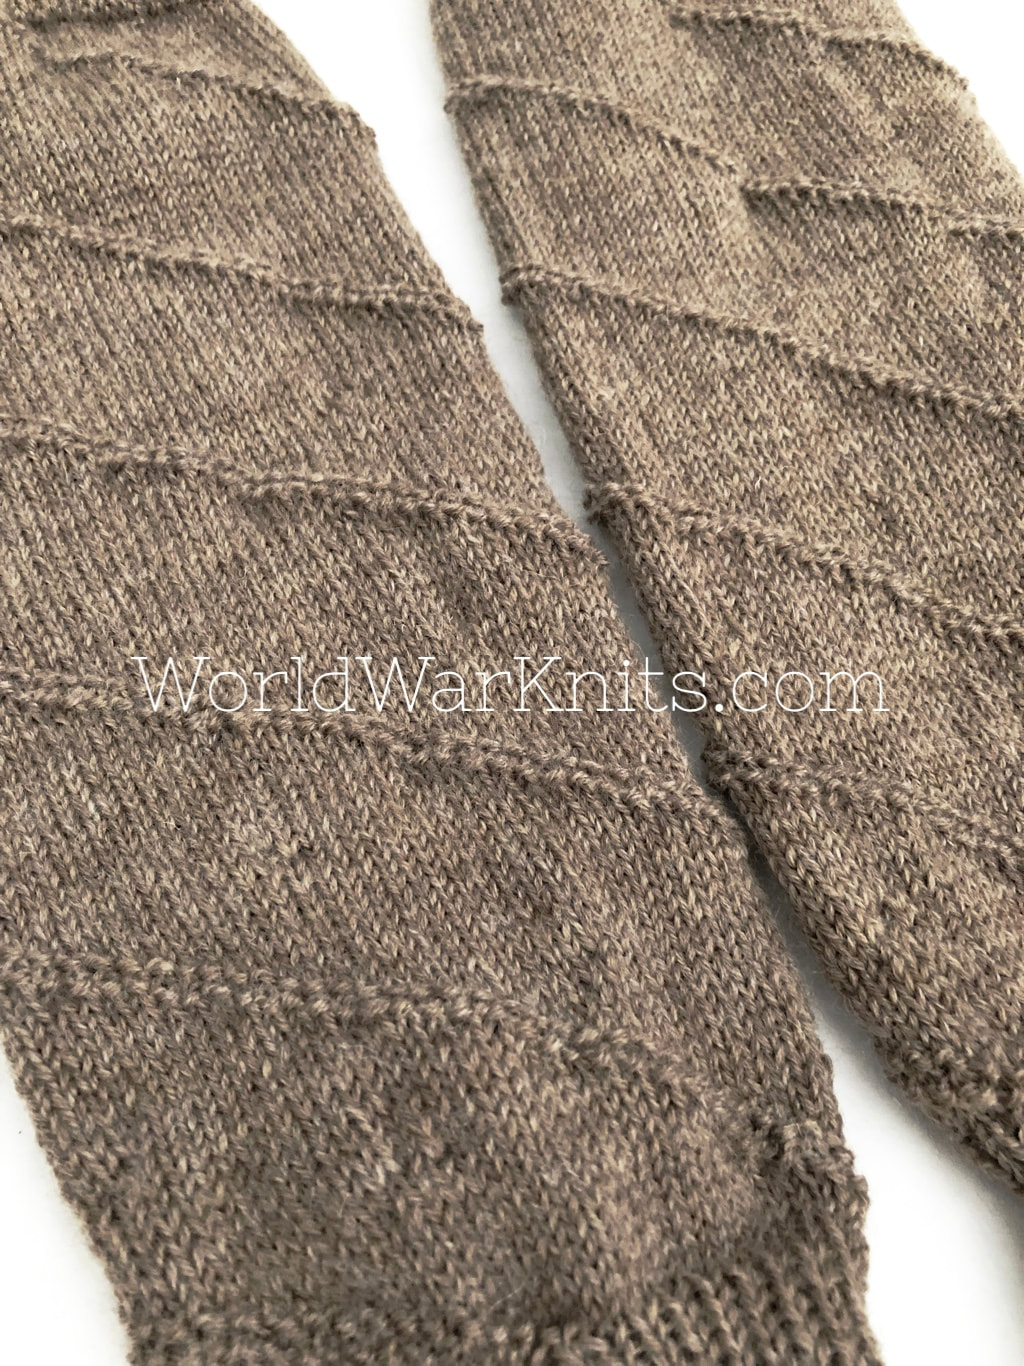 Reproduction Knitted Puttee Stocking Khaki Color